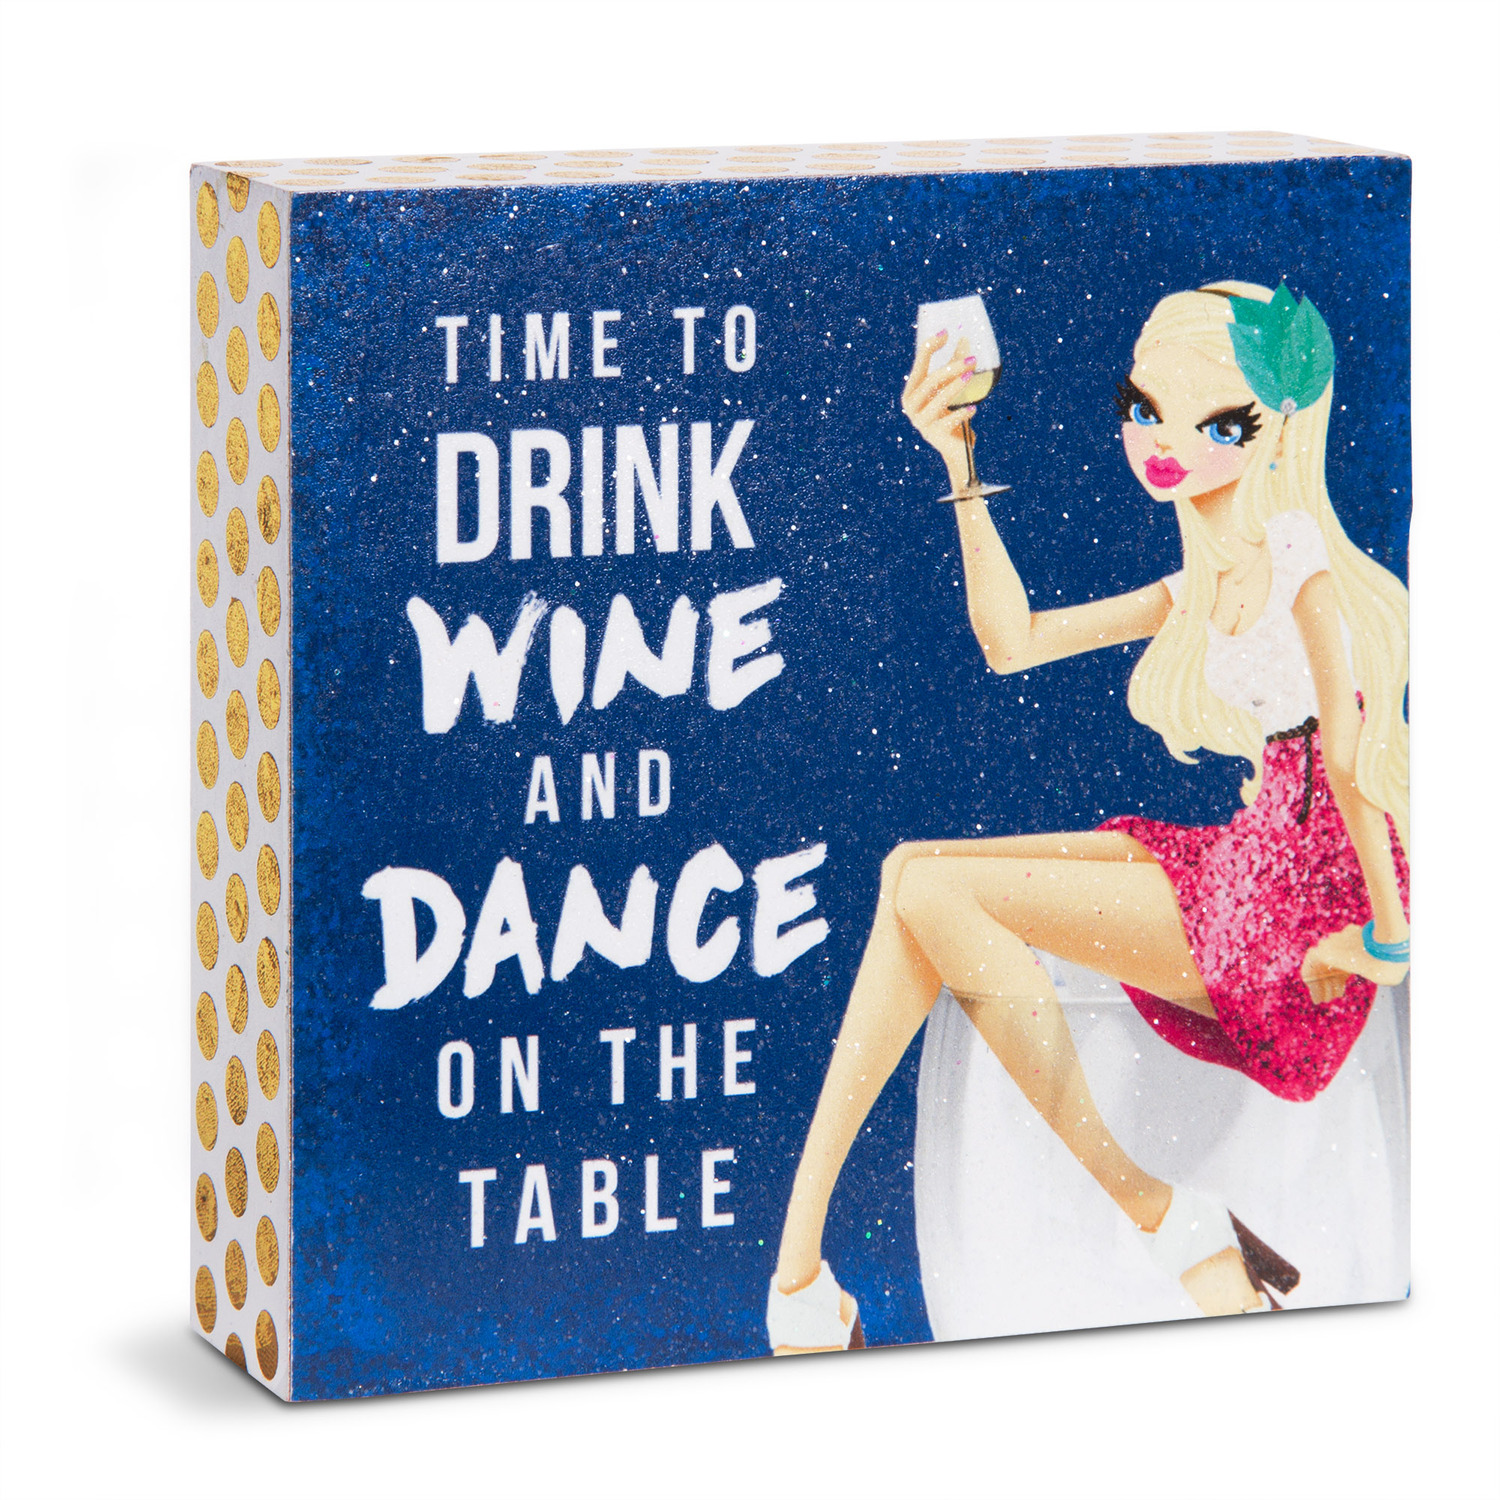 Time to Drink Wine by Girlfinds - Time to Drink Wine - 4" x 4" Plaque